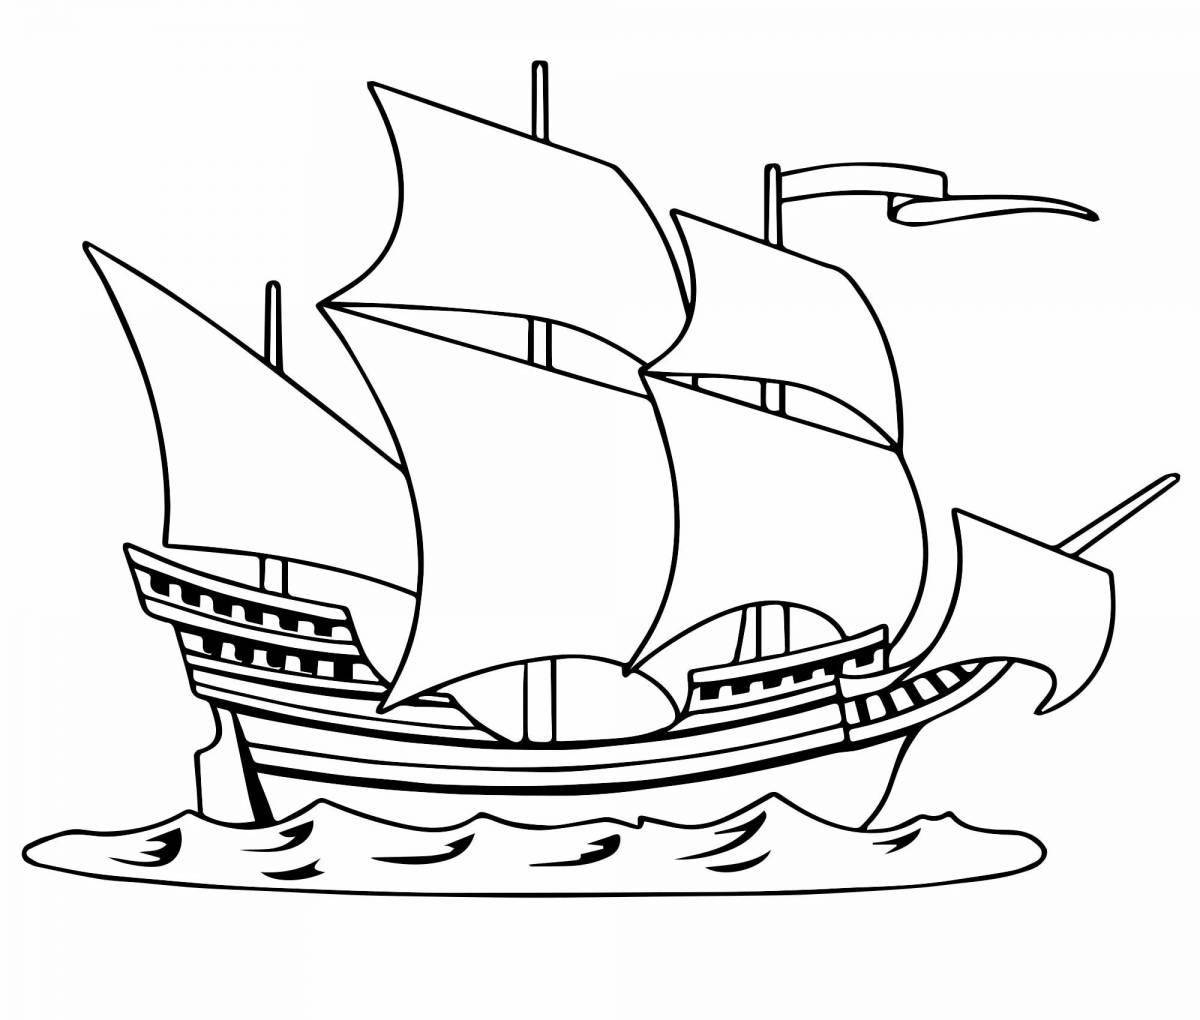 Adorable ship coloring page for 7 year olds